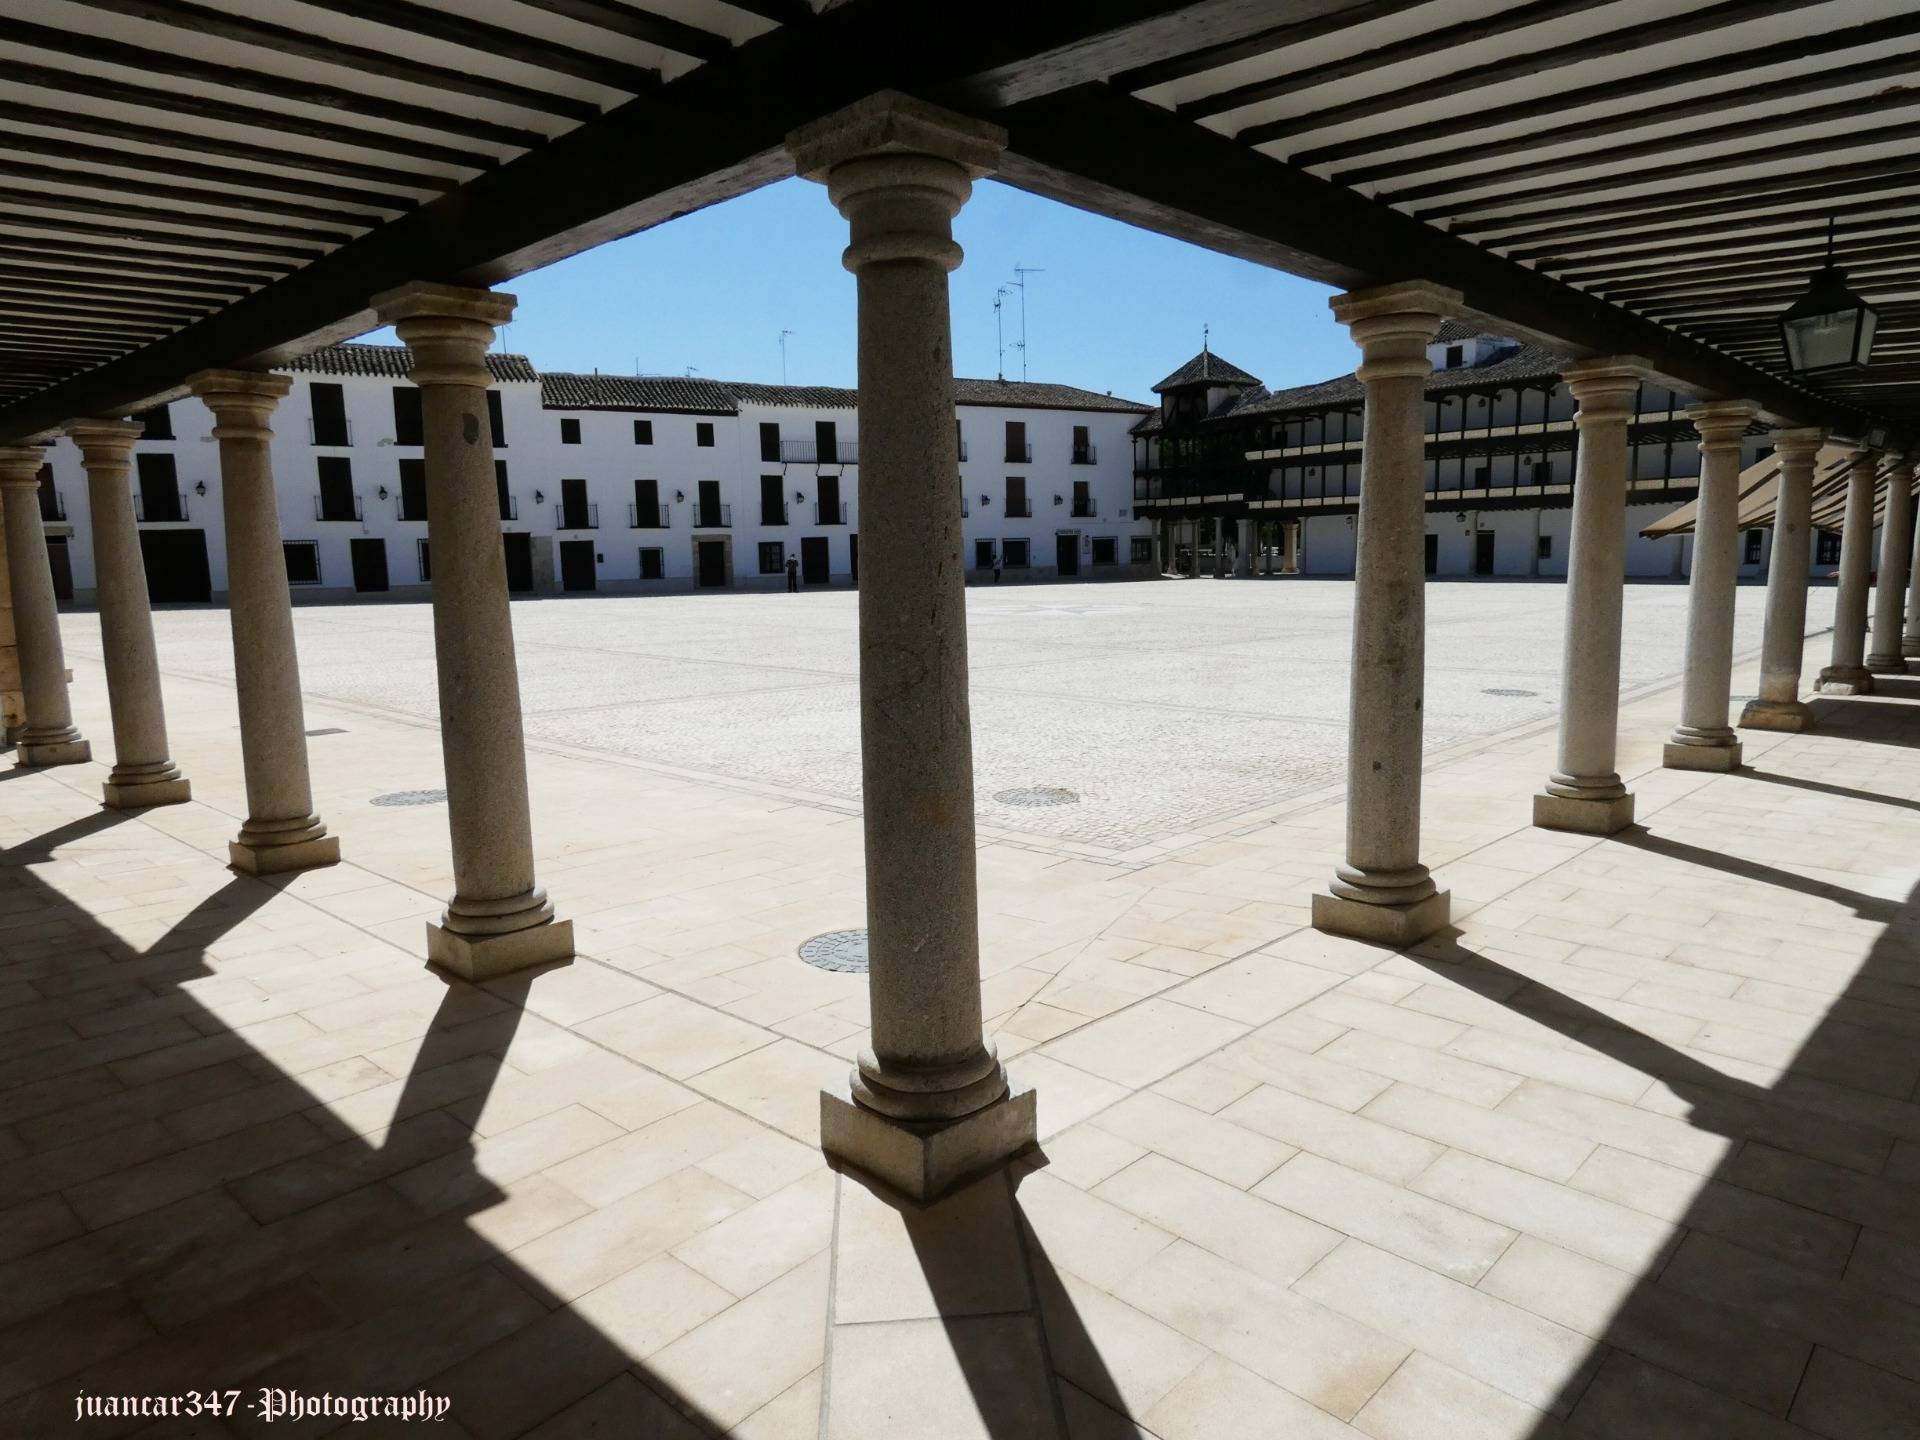 Tembleque’s Main Square: traditional architecture and charm